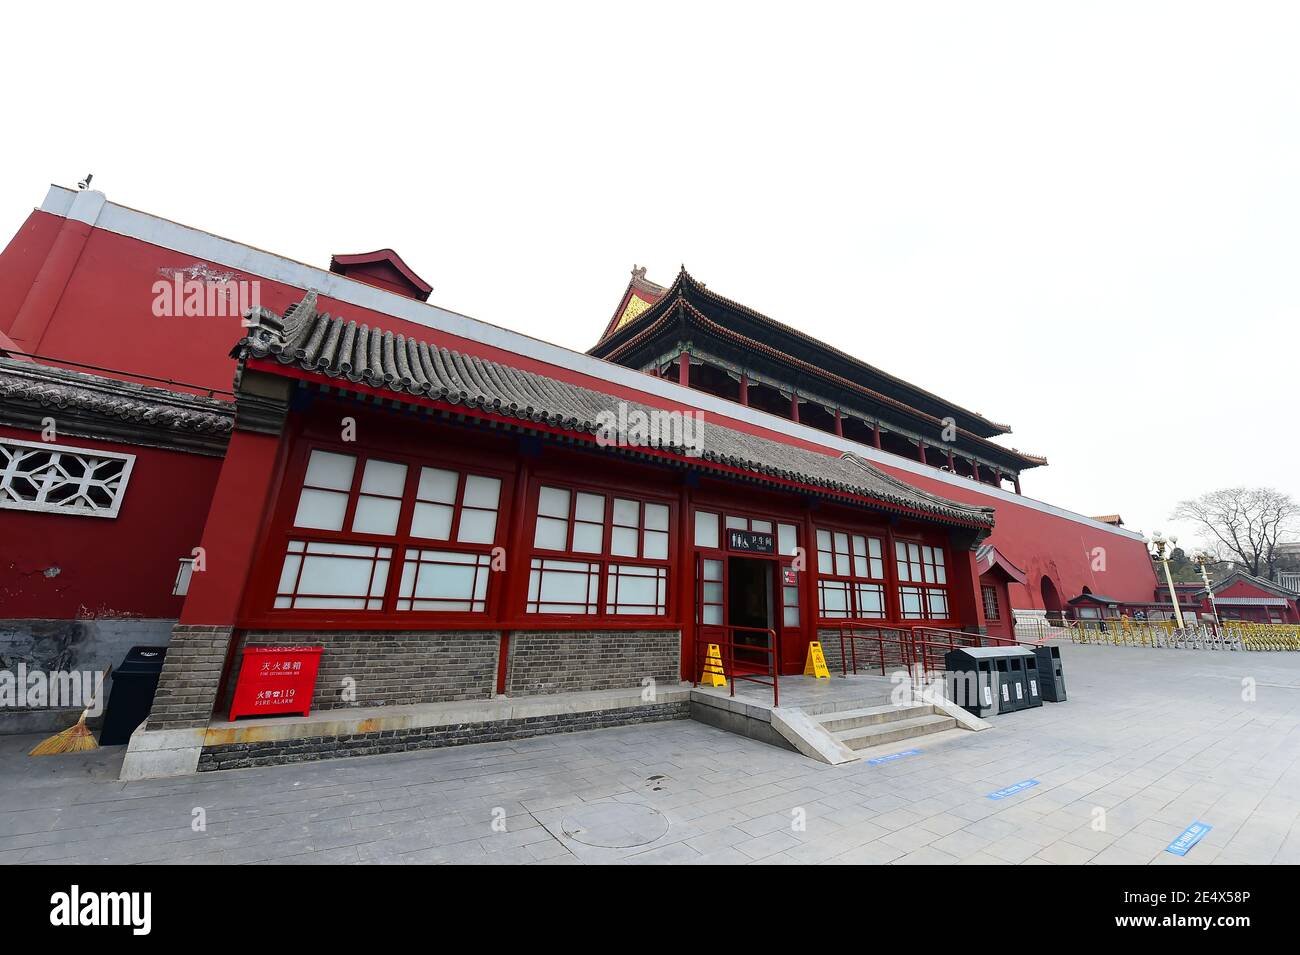 The exterior view of the newly finished toilet, which combines many traditional Chinese elements and is built like a traditional Chinese architecture, Stock Photo